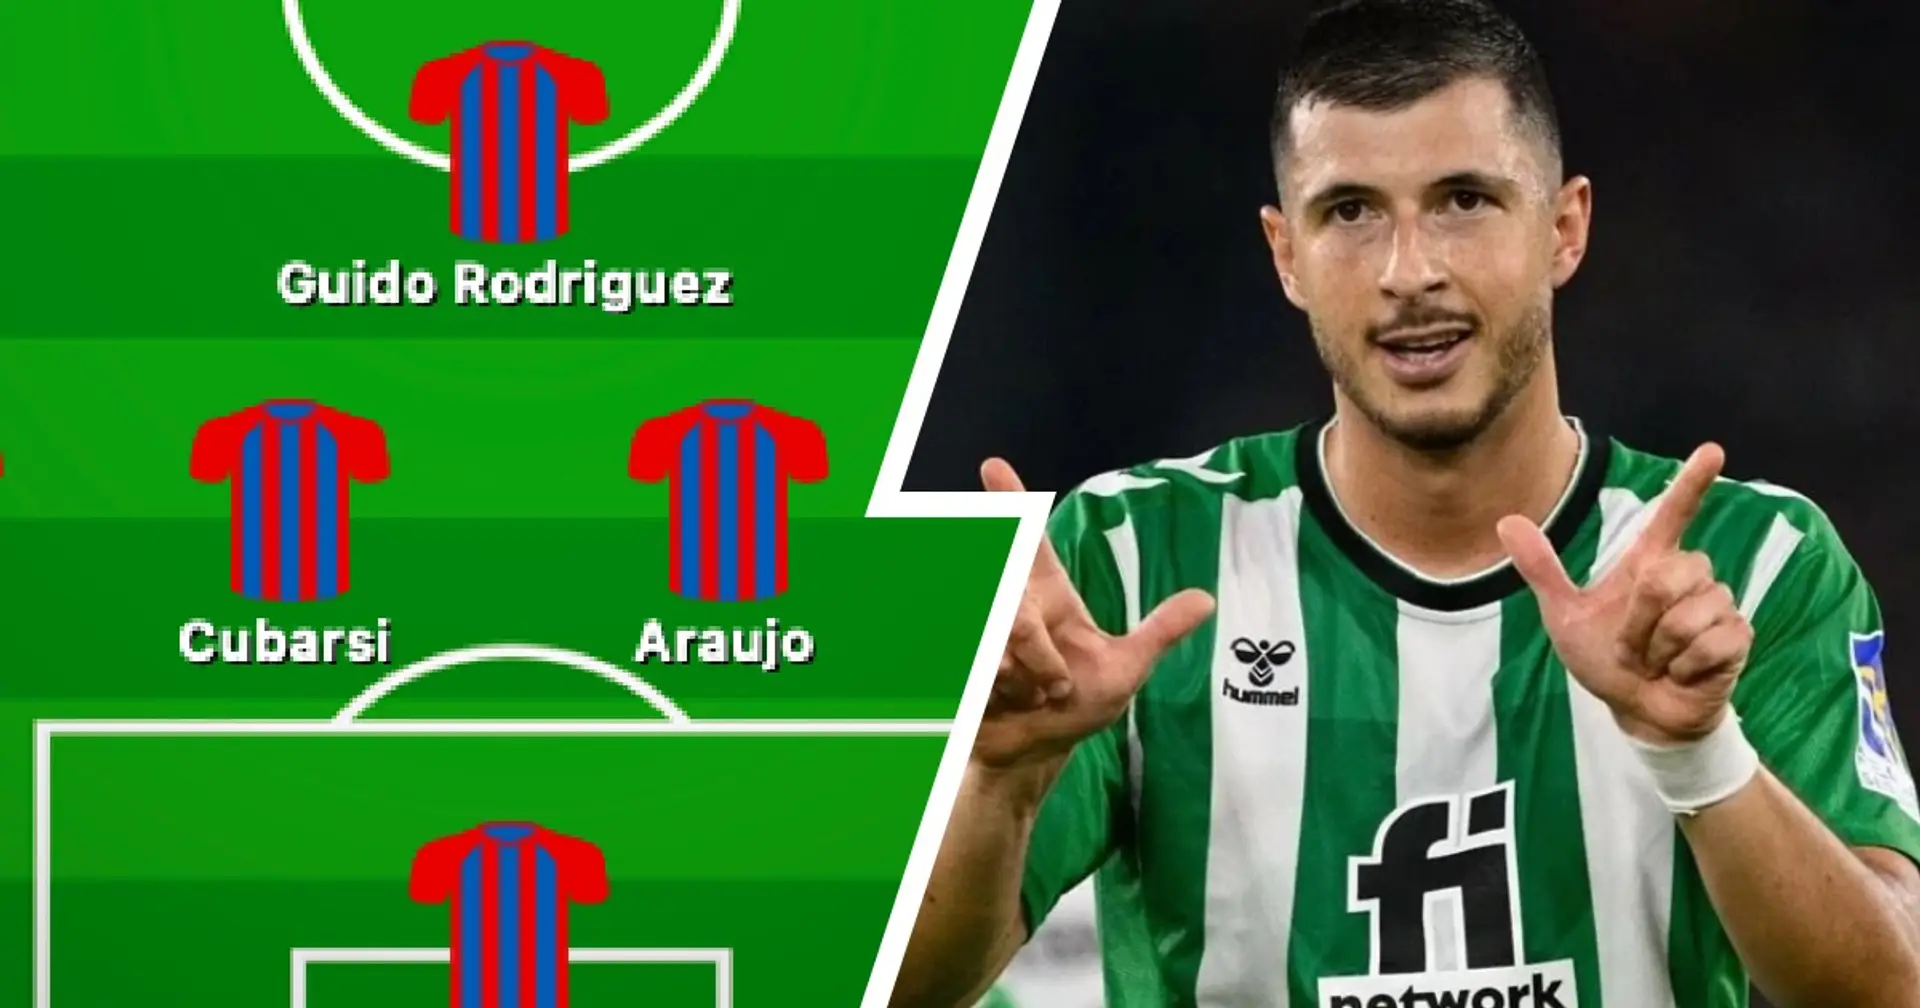 How Barca could line up next season with Guido Rodriguez - shown 